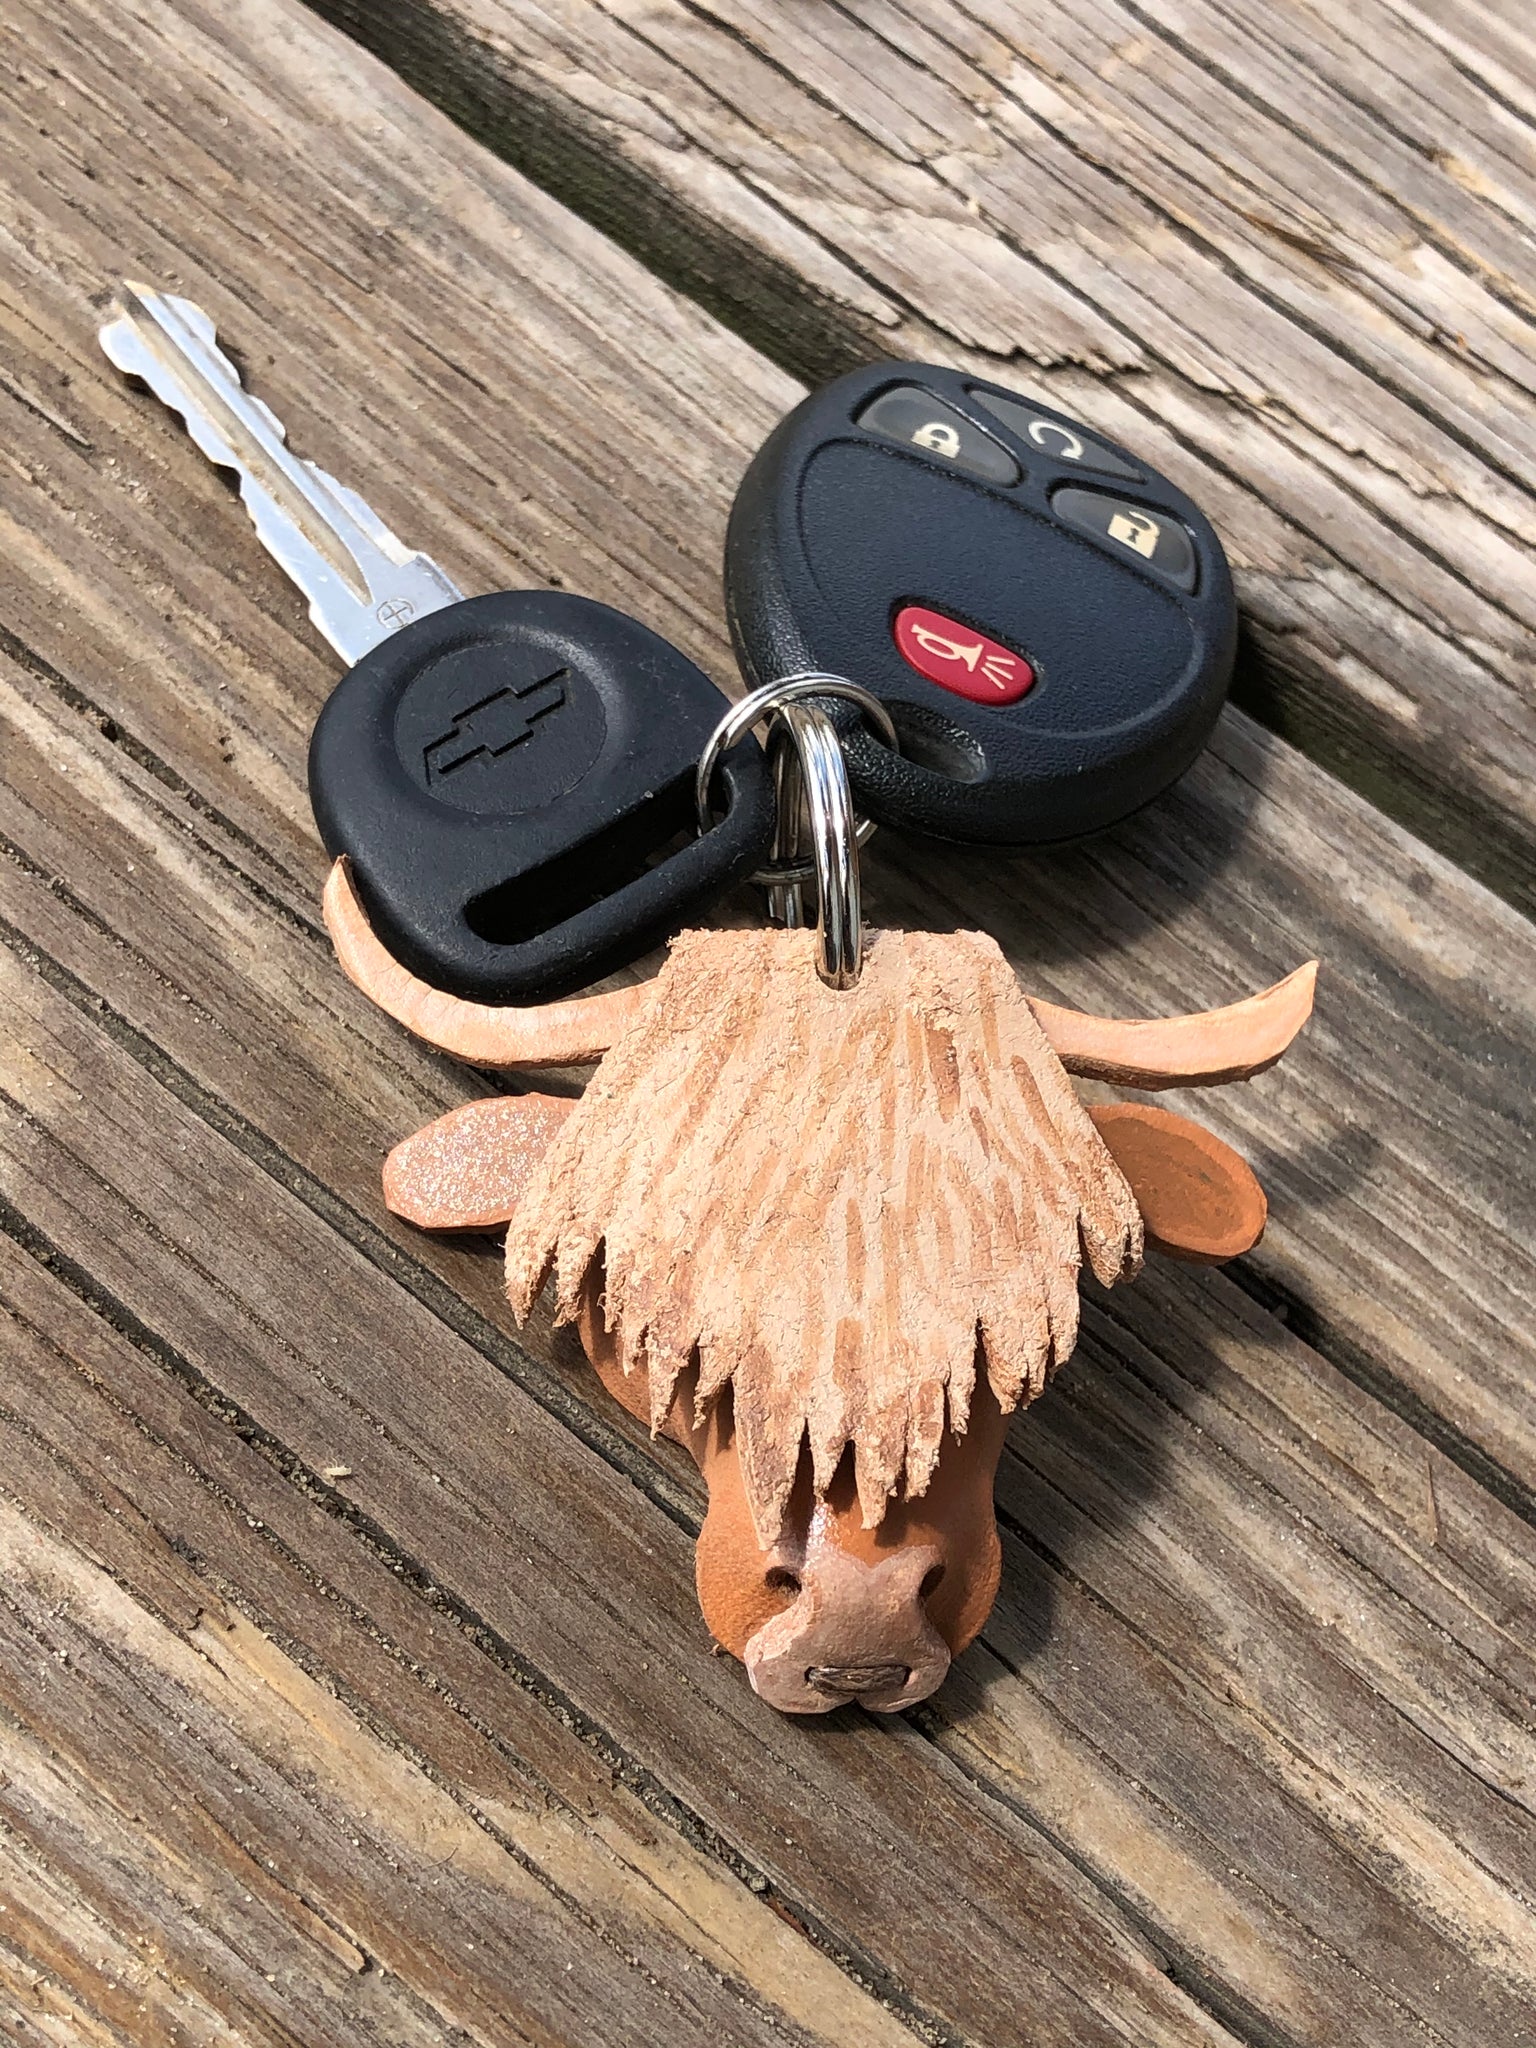 Pioneer Supplier & Creations Highland Cow Shaped Keychain